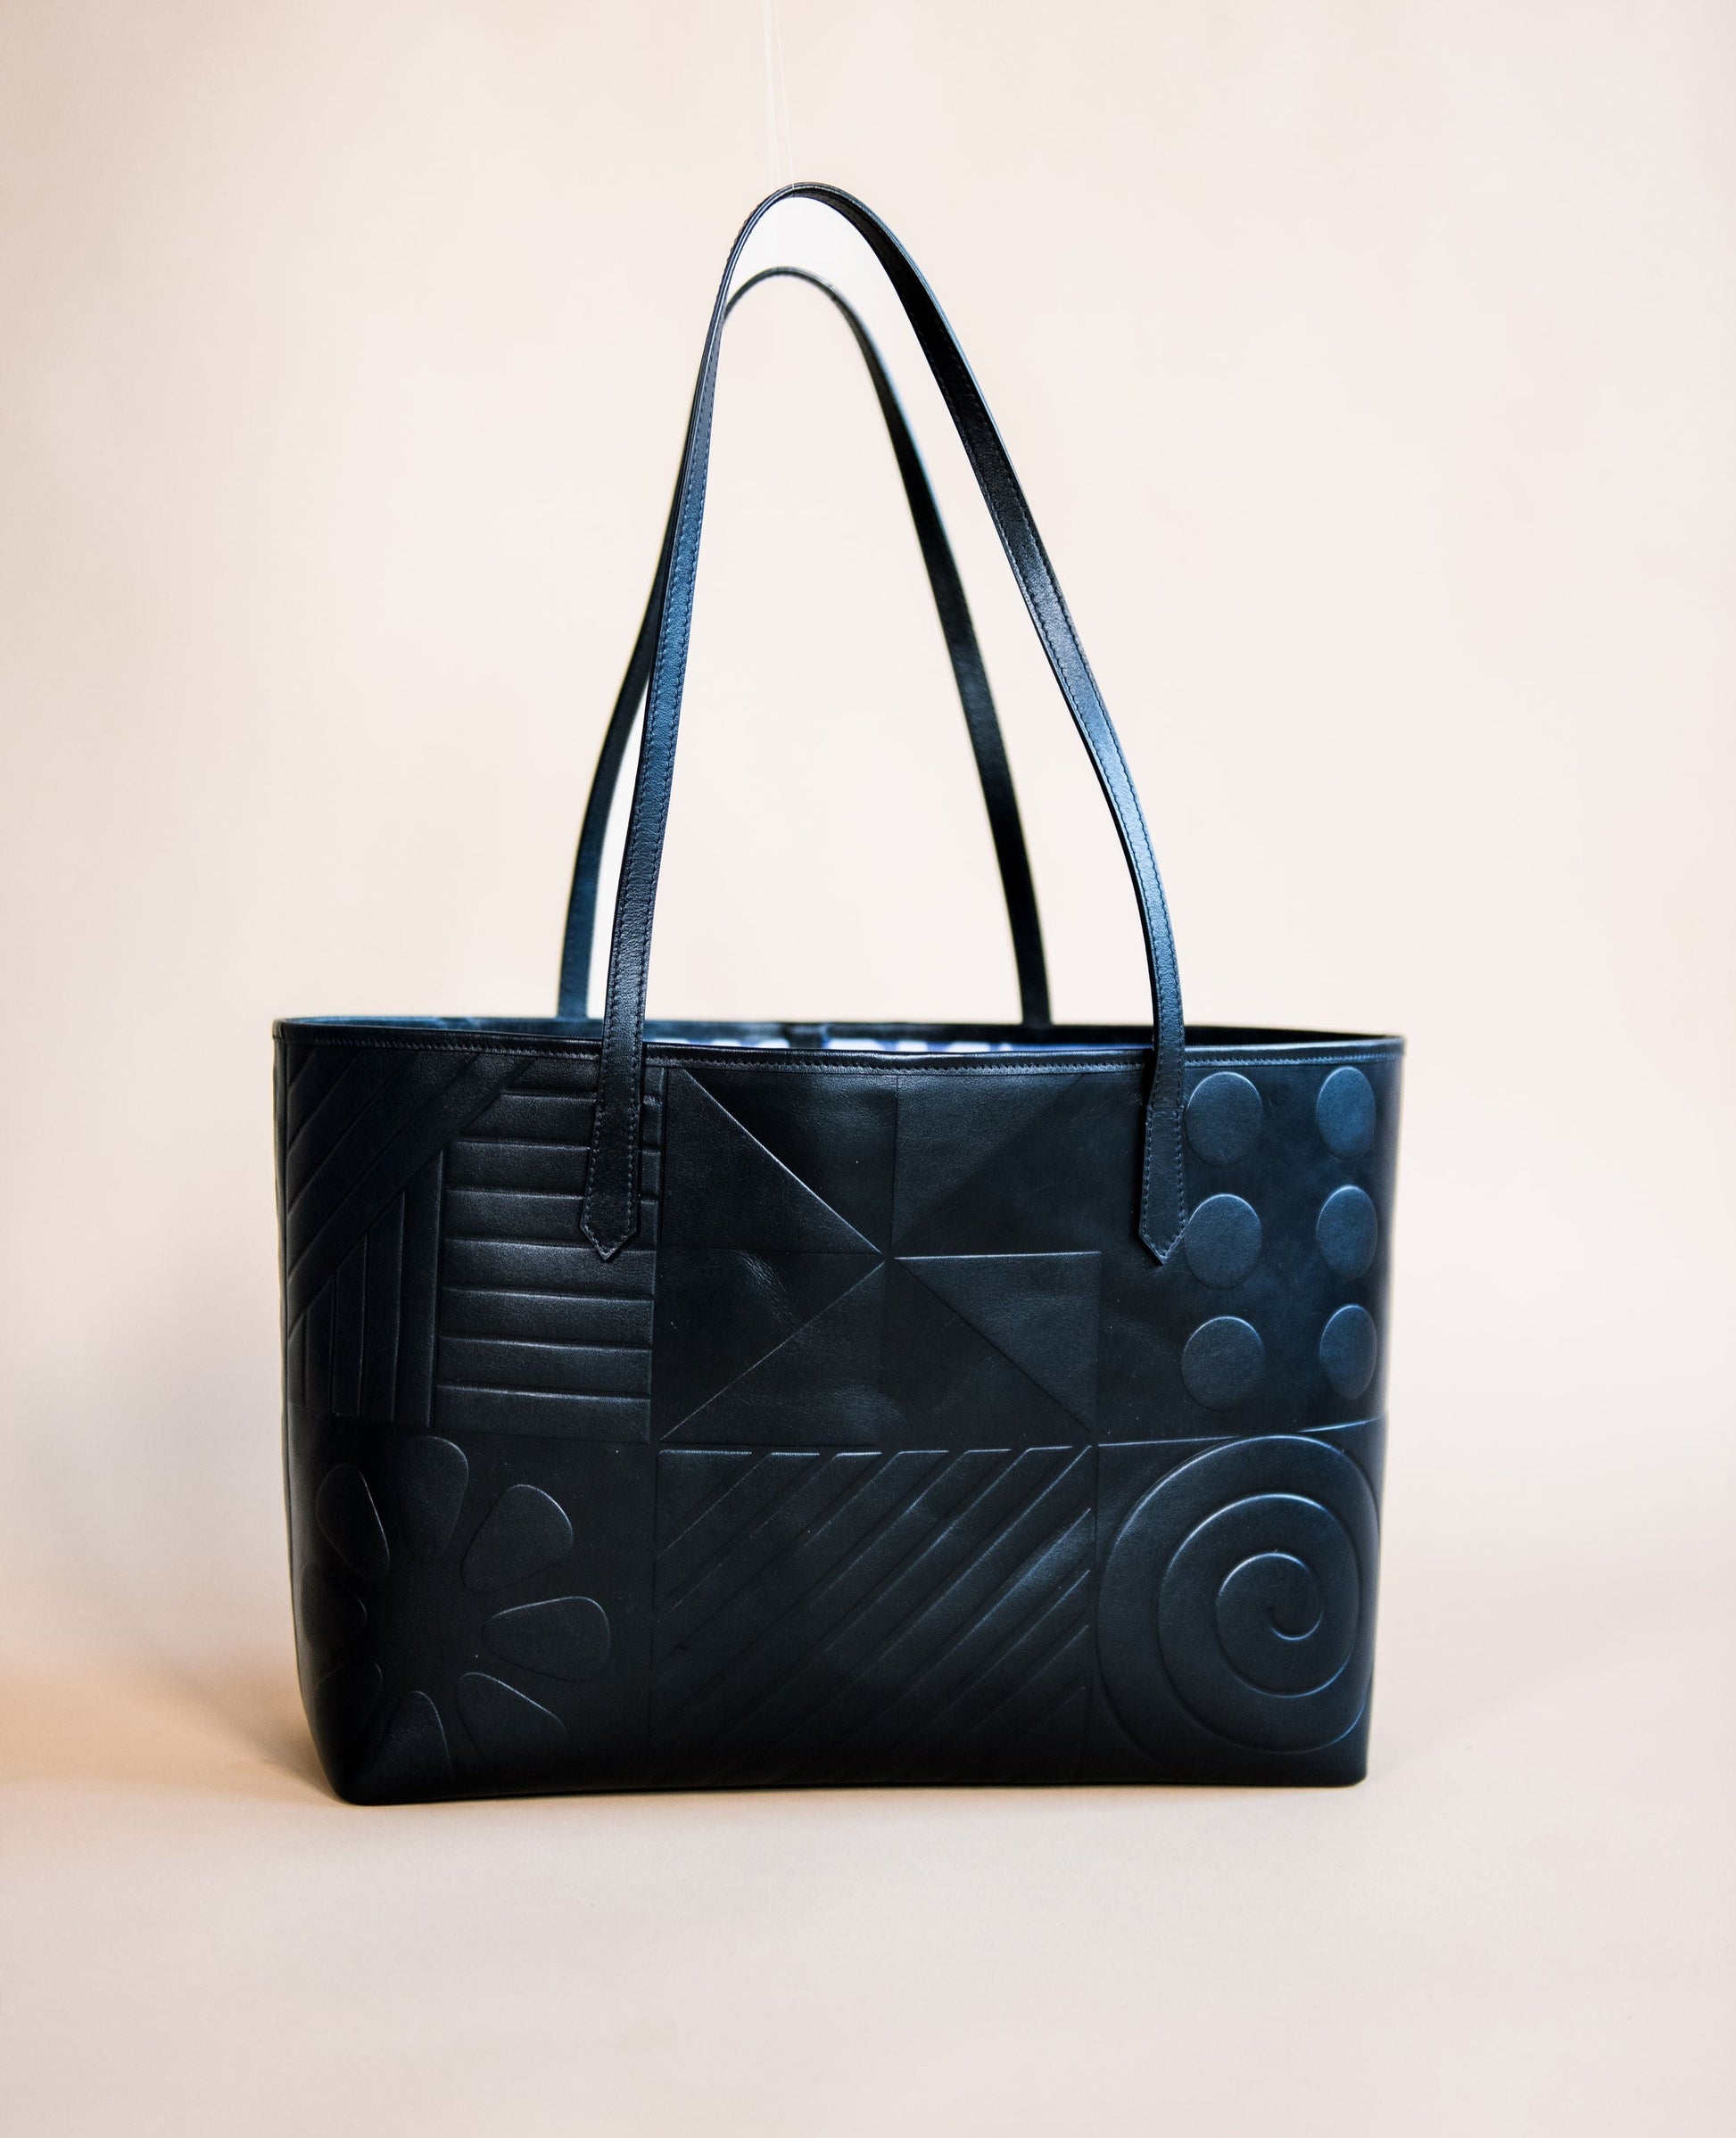 Black leather tote bag featuring Afro-modern Adire motifs, symbolizing cultural heritage and contemporary elegance. Crafted from full-grain Italian leather with vibrant Adire fabric lining. Choose from three colorful variations. Egba Ake